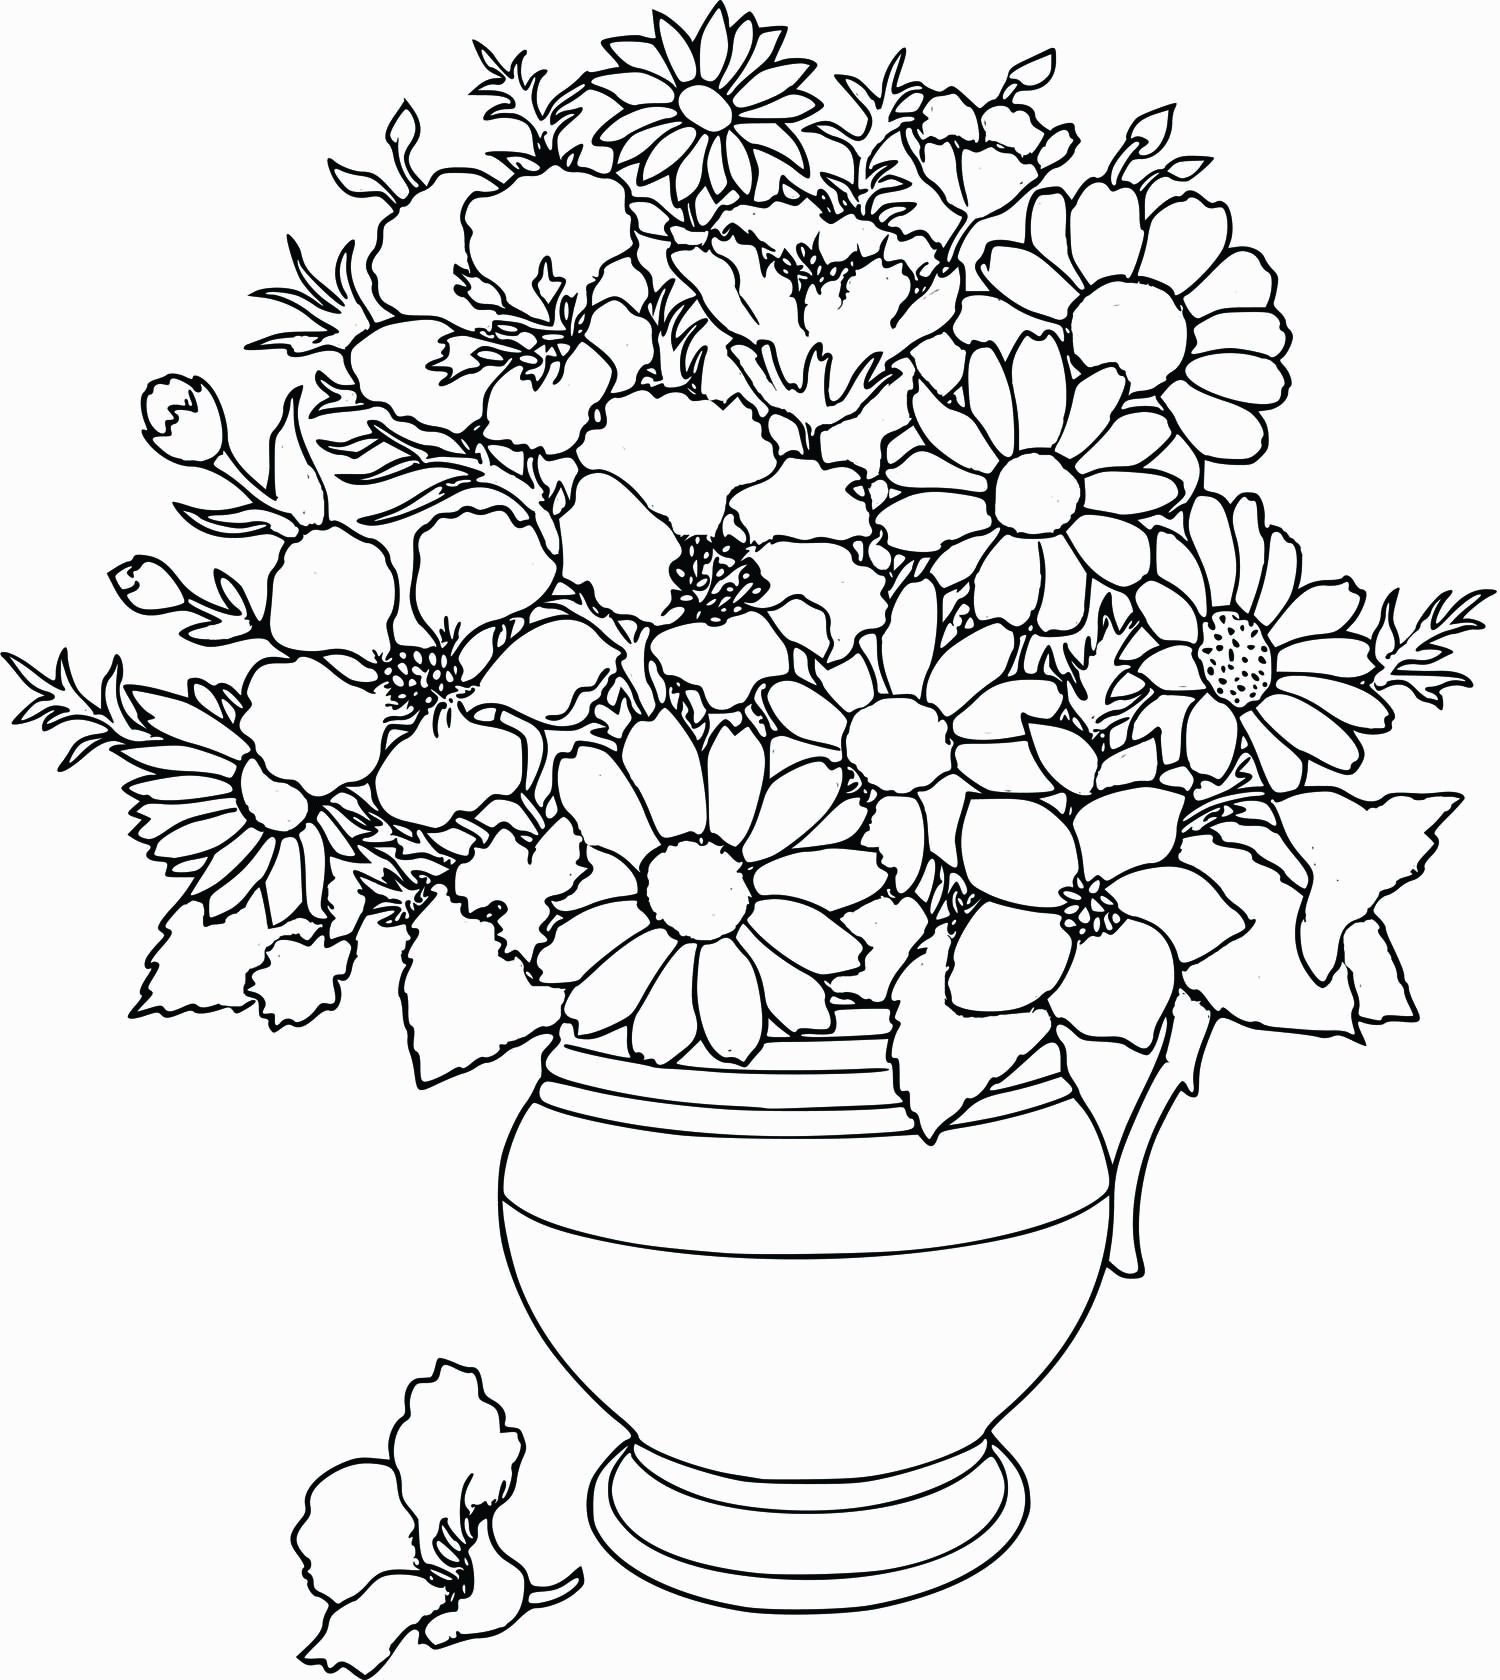 Amazing Flower Coloring Pages For Adults - Coloring Pages For All Ages